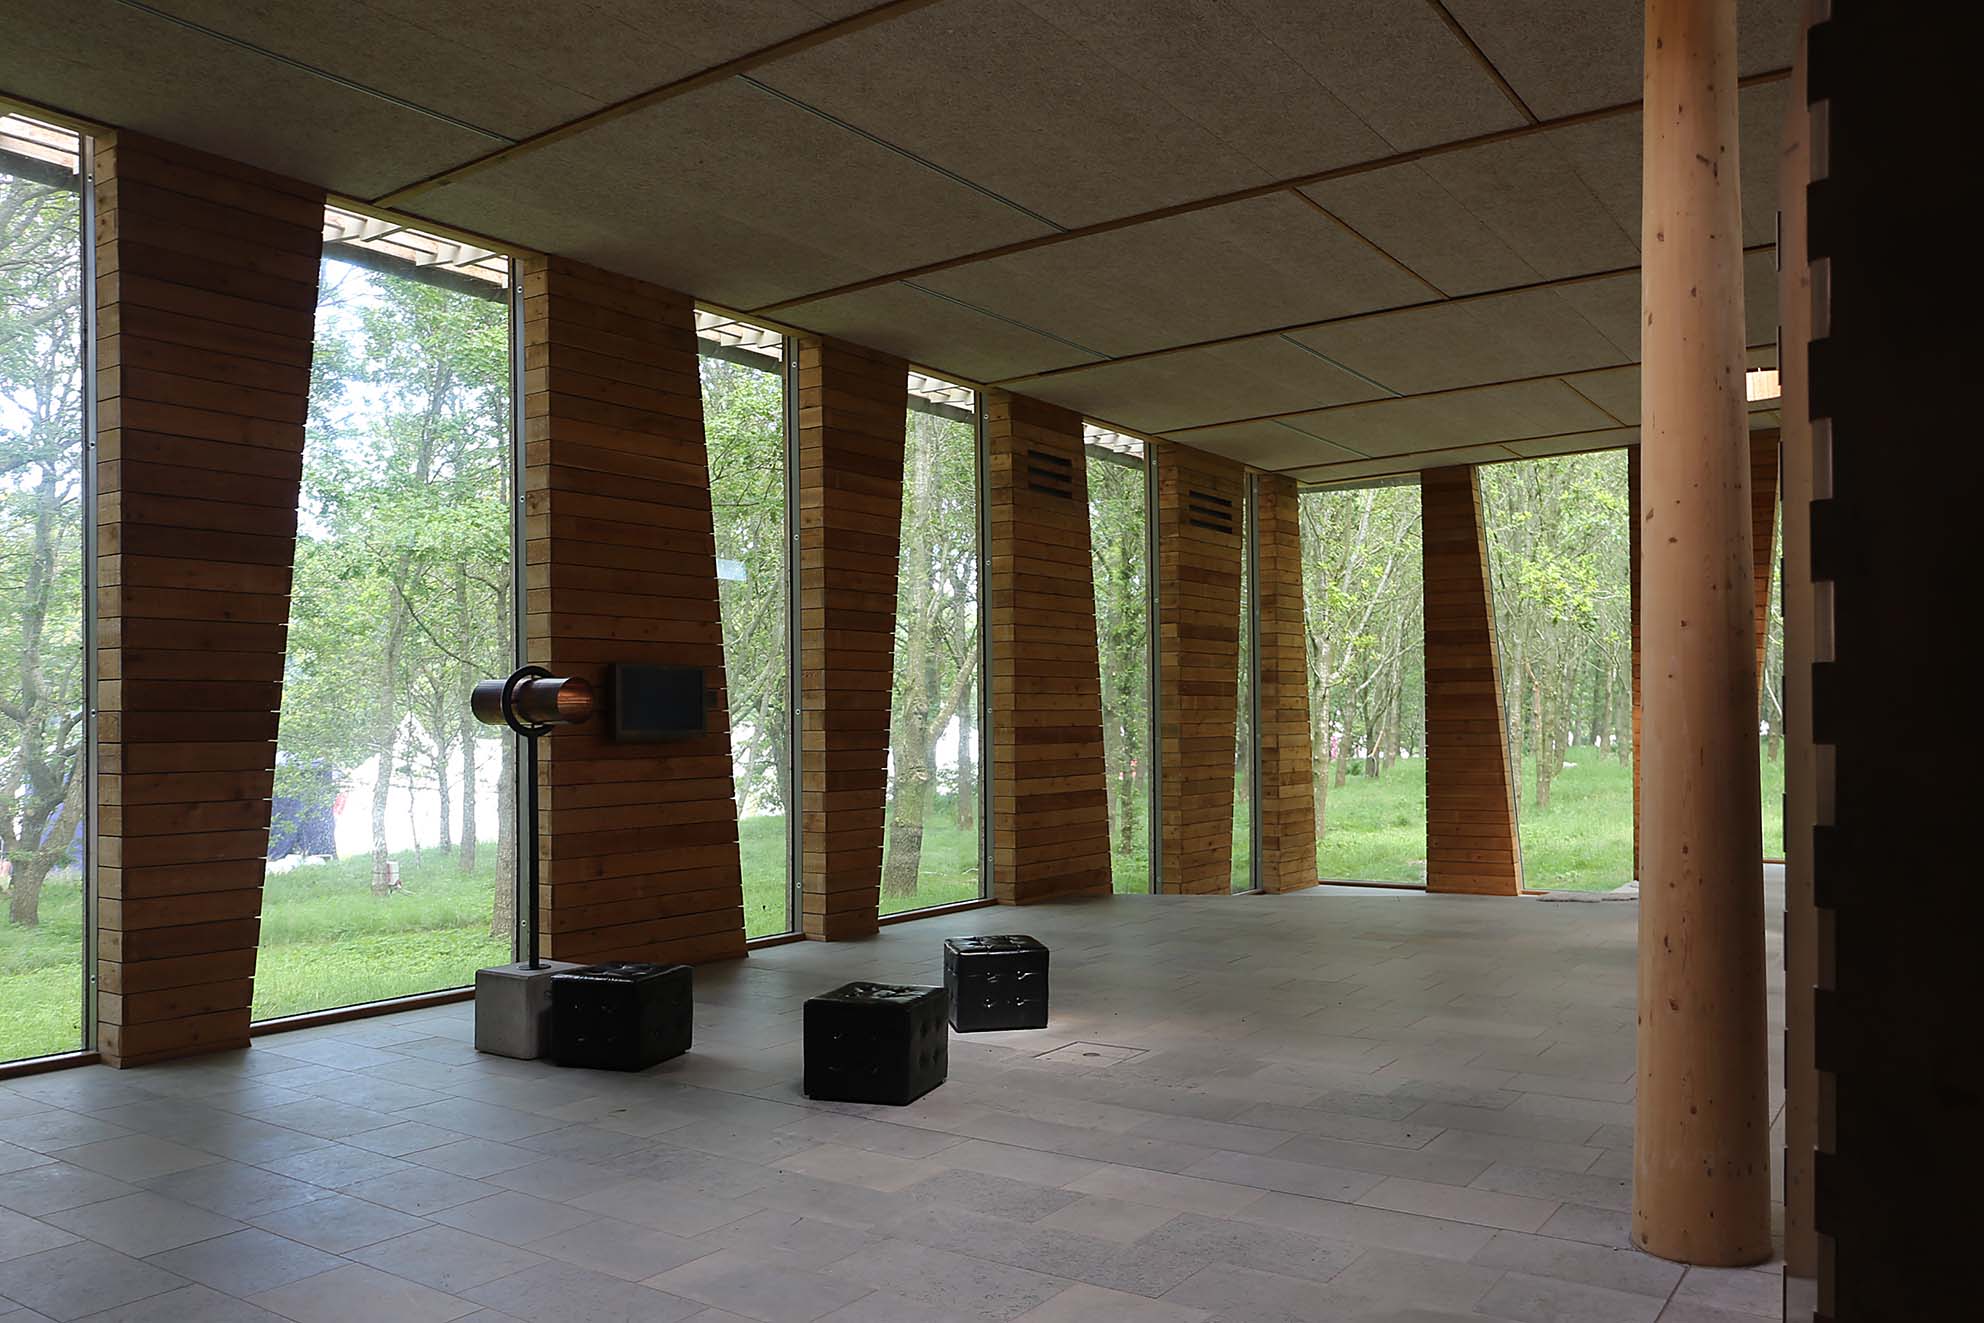 The exhibition room of Spøttrup Castle with sections made of oak tree and glass-to-glass corner joints.